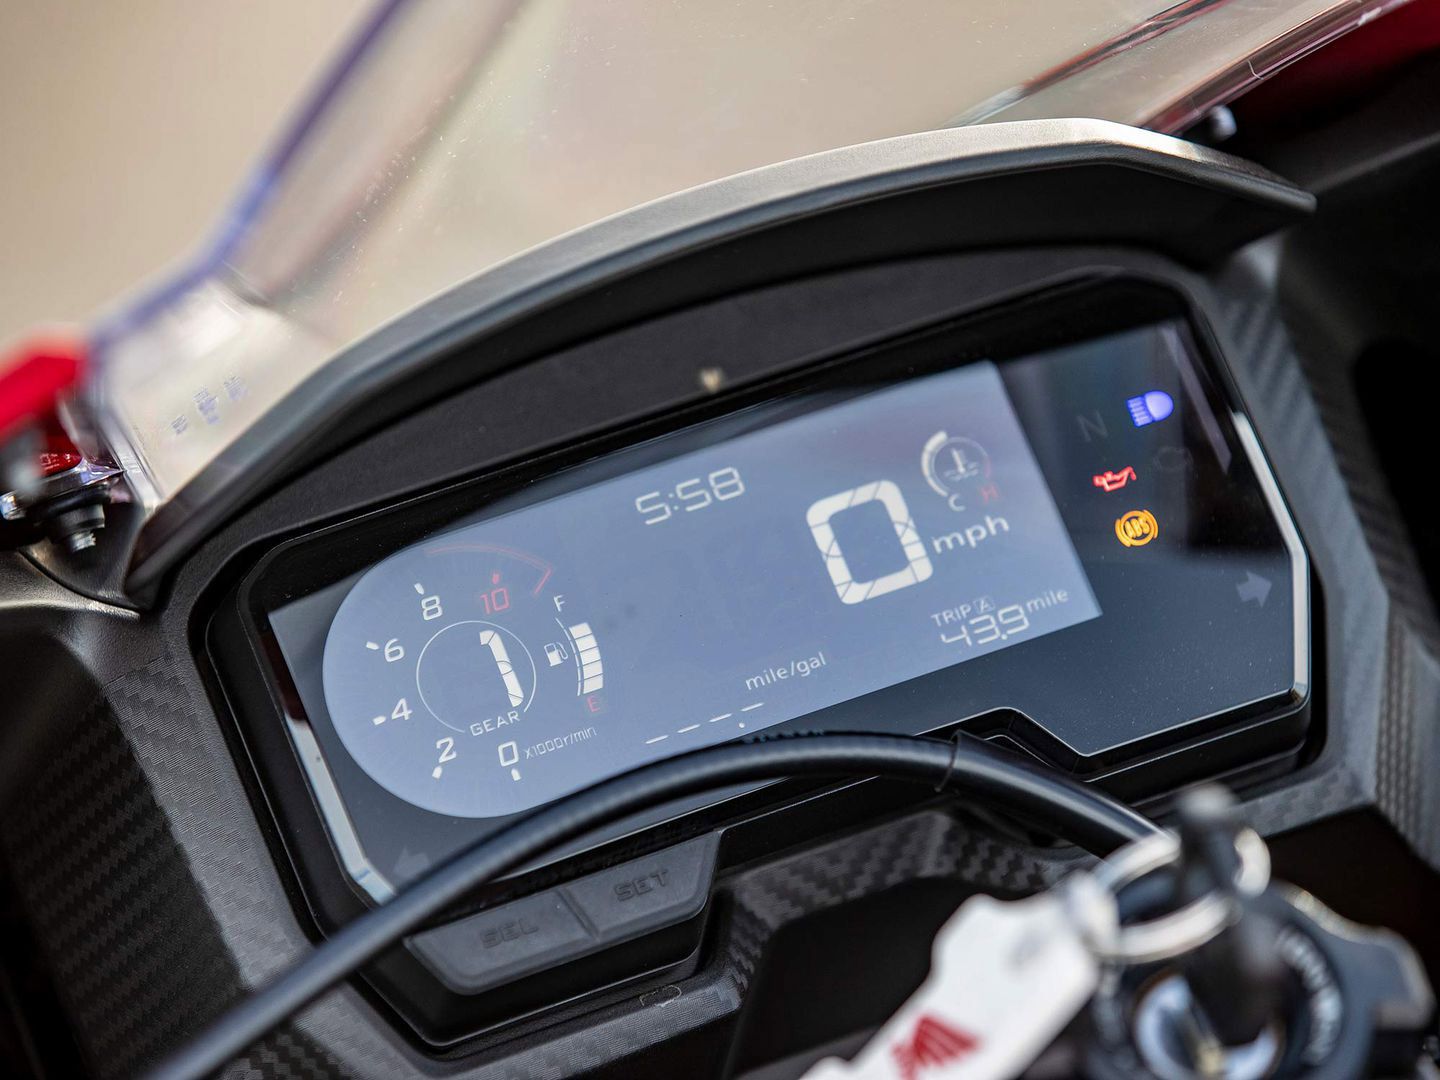 While the CBR500R does feature all-LED lighting, the LCD dashboard looks dated when compared to the full-color TFT displays that come standard on many of today’s bikes.